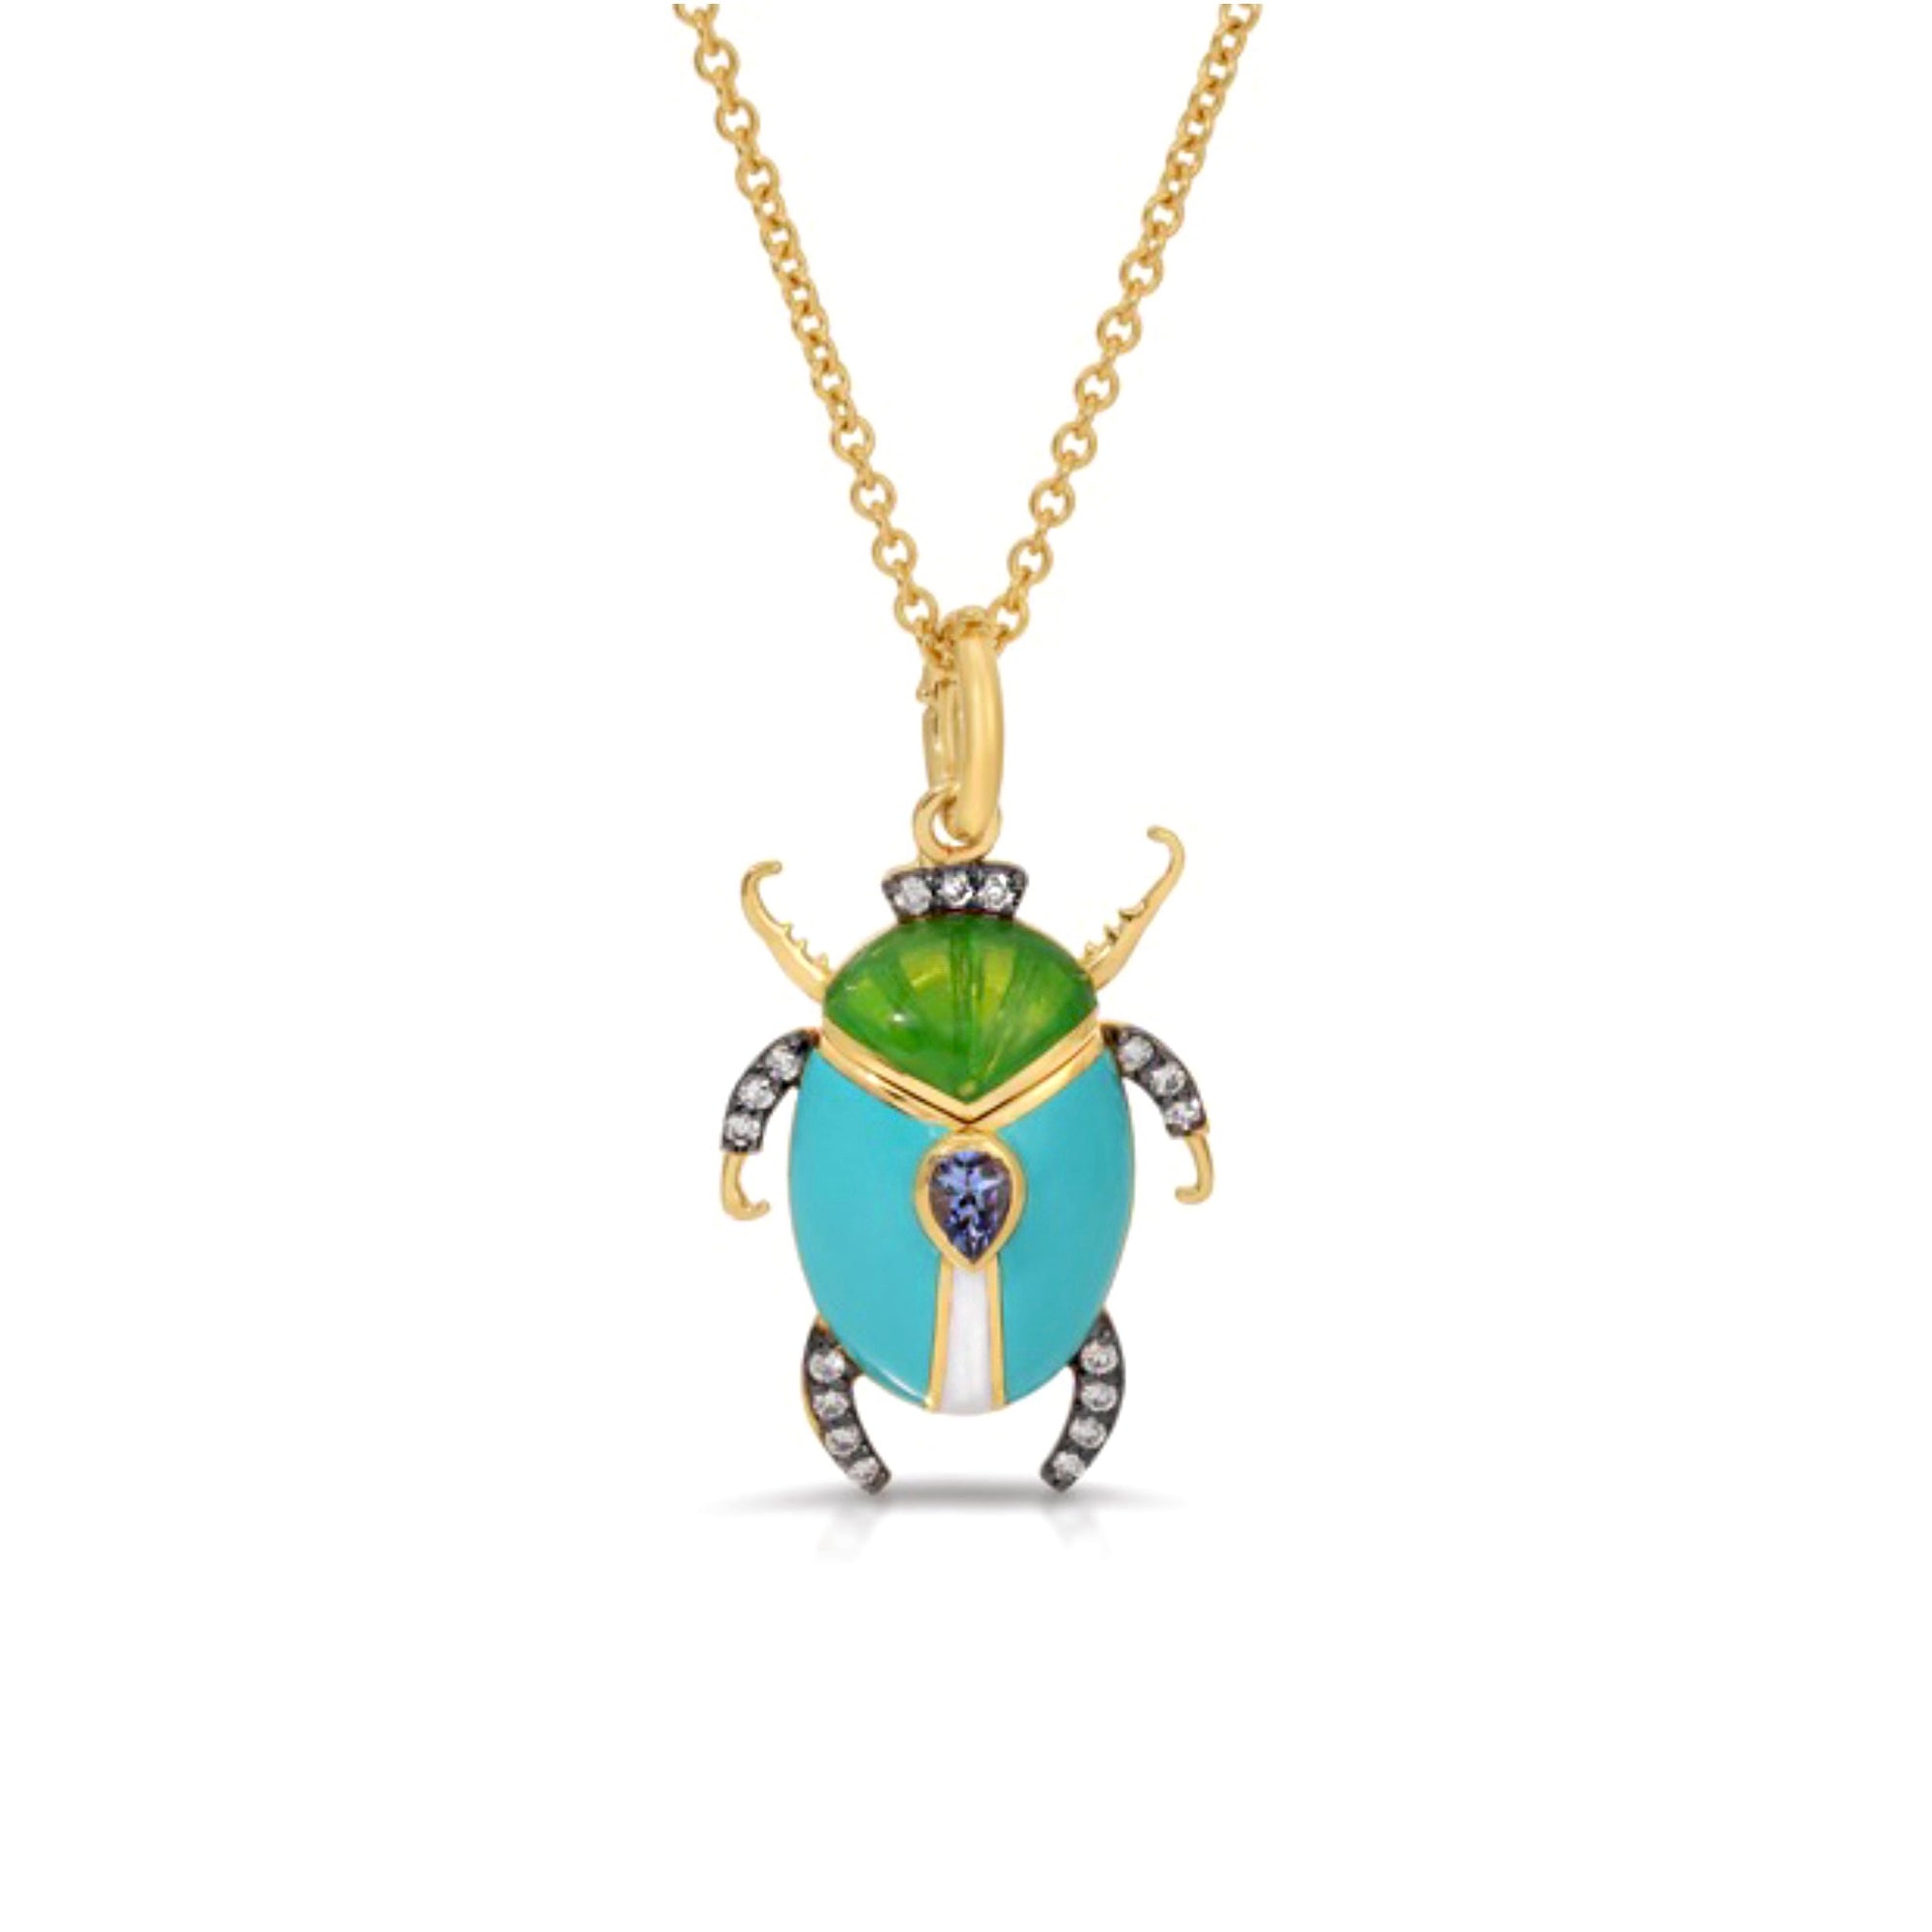 Sapphire Enamel Beetle Necklace by Lord Jewelry available at Talisman Collection Fine Jewelers in El Dorado Hills, CA and online. If you're looking for a darling piece that exudes timelessness, look no further than this Sapphire Enamel Beetle Pendant Necklace. Crafted in 18k yellow gold, the charm features a beautiful enamel scarab, accented with a 0.19 cts cabochon pear sapphire and 0.14 cts of diamonds. Wear this pendant as a reminder of the protection that the beetle symbolizes.